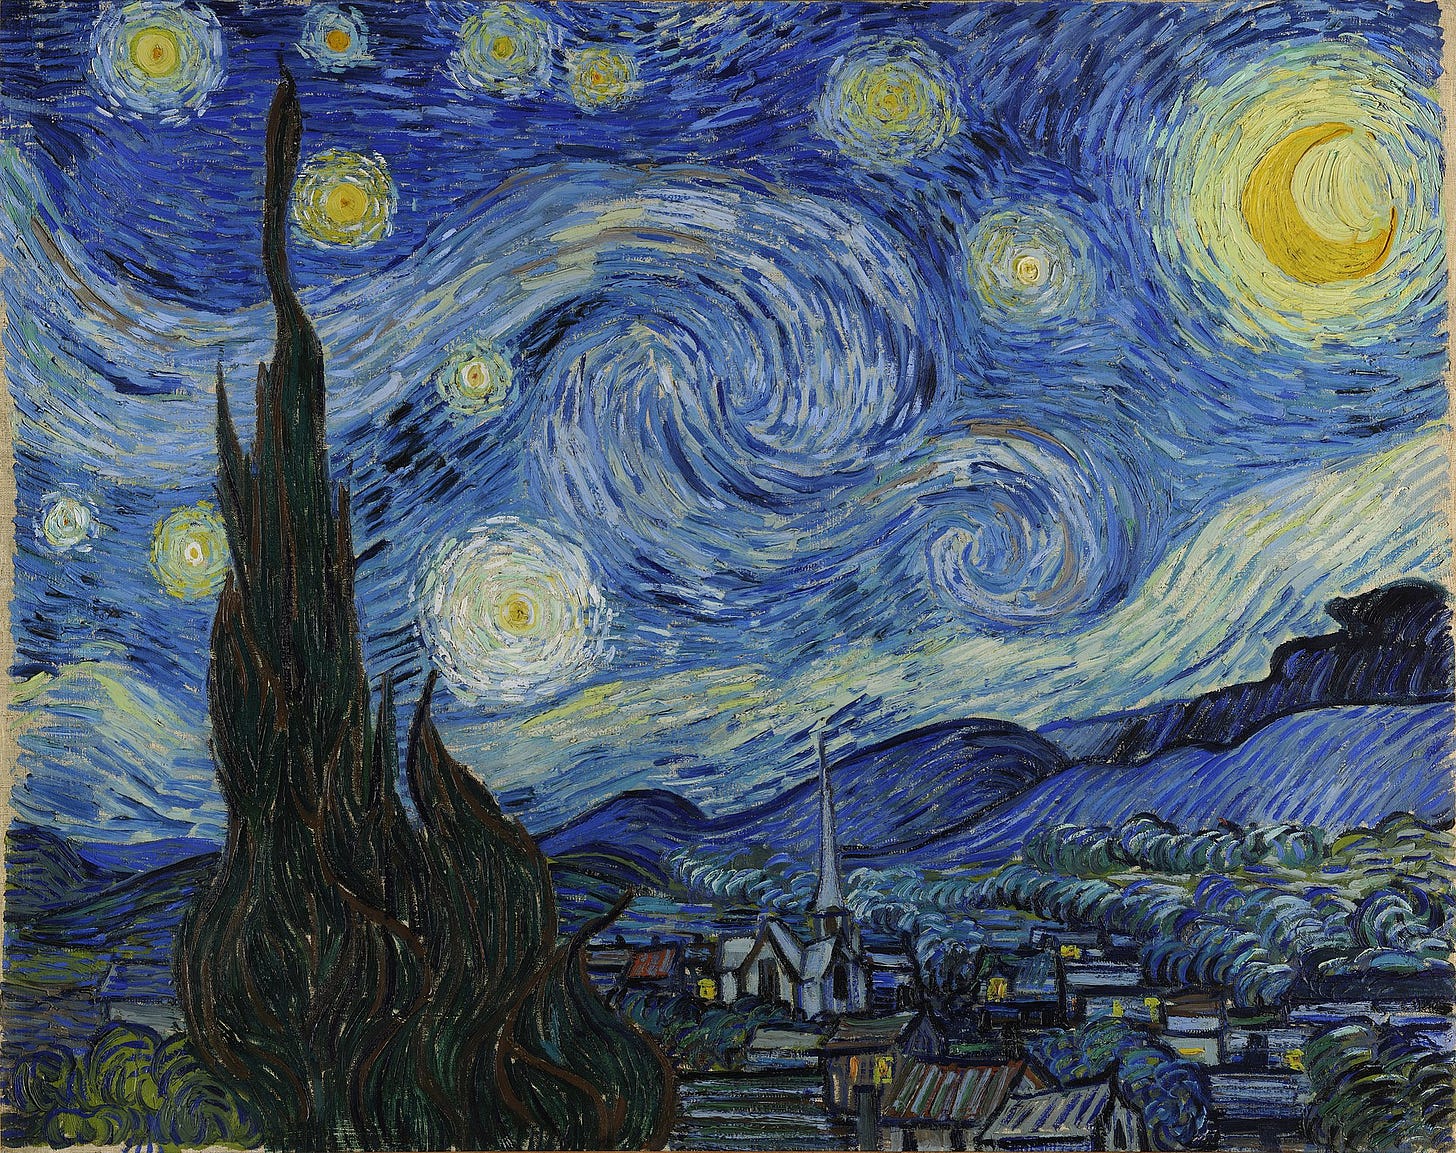 Van Gogh's Starry Night - a swirling post-impressionist depiction of the night skies over Saint-Remy, France